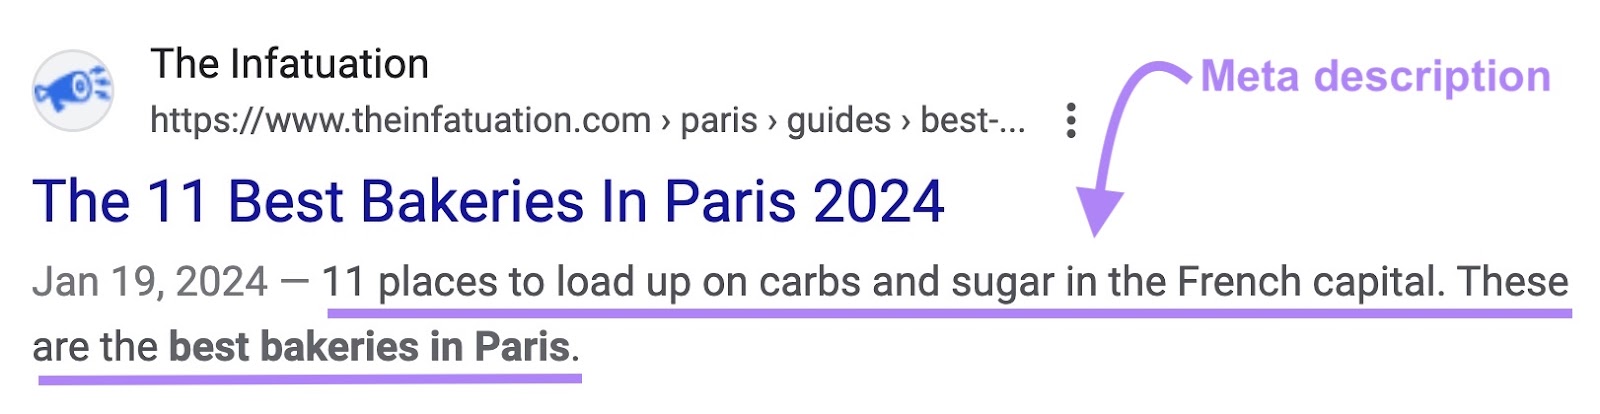 Meta description on SERP that reads: "11 places to load up on carbs and sugar in the French capital. These are the best bakeries in Paris"